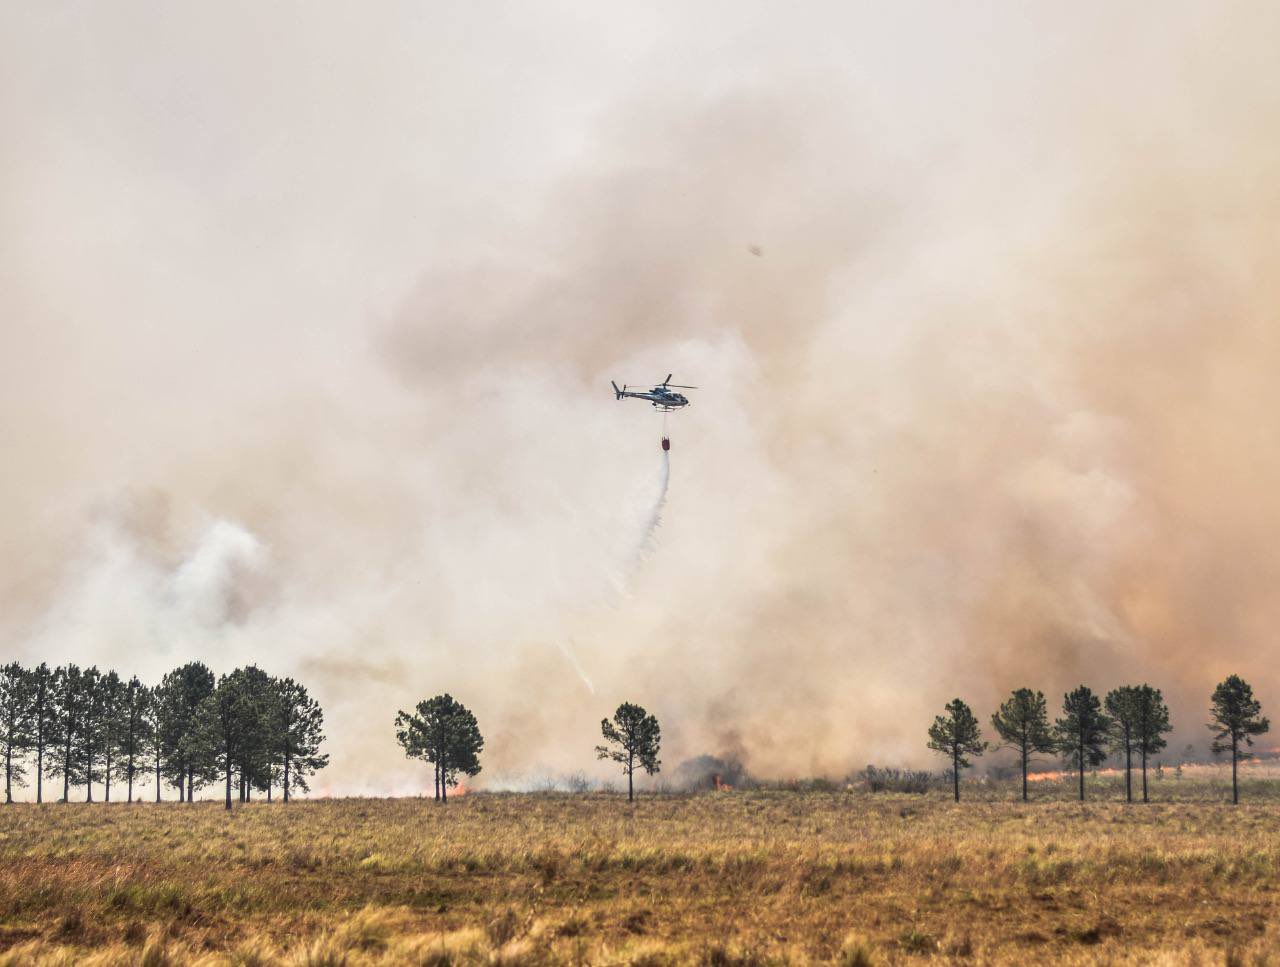 Helicopter flying over fire in a field